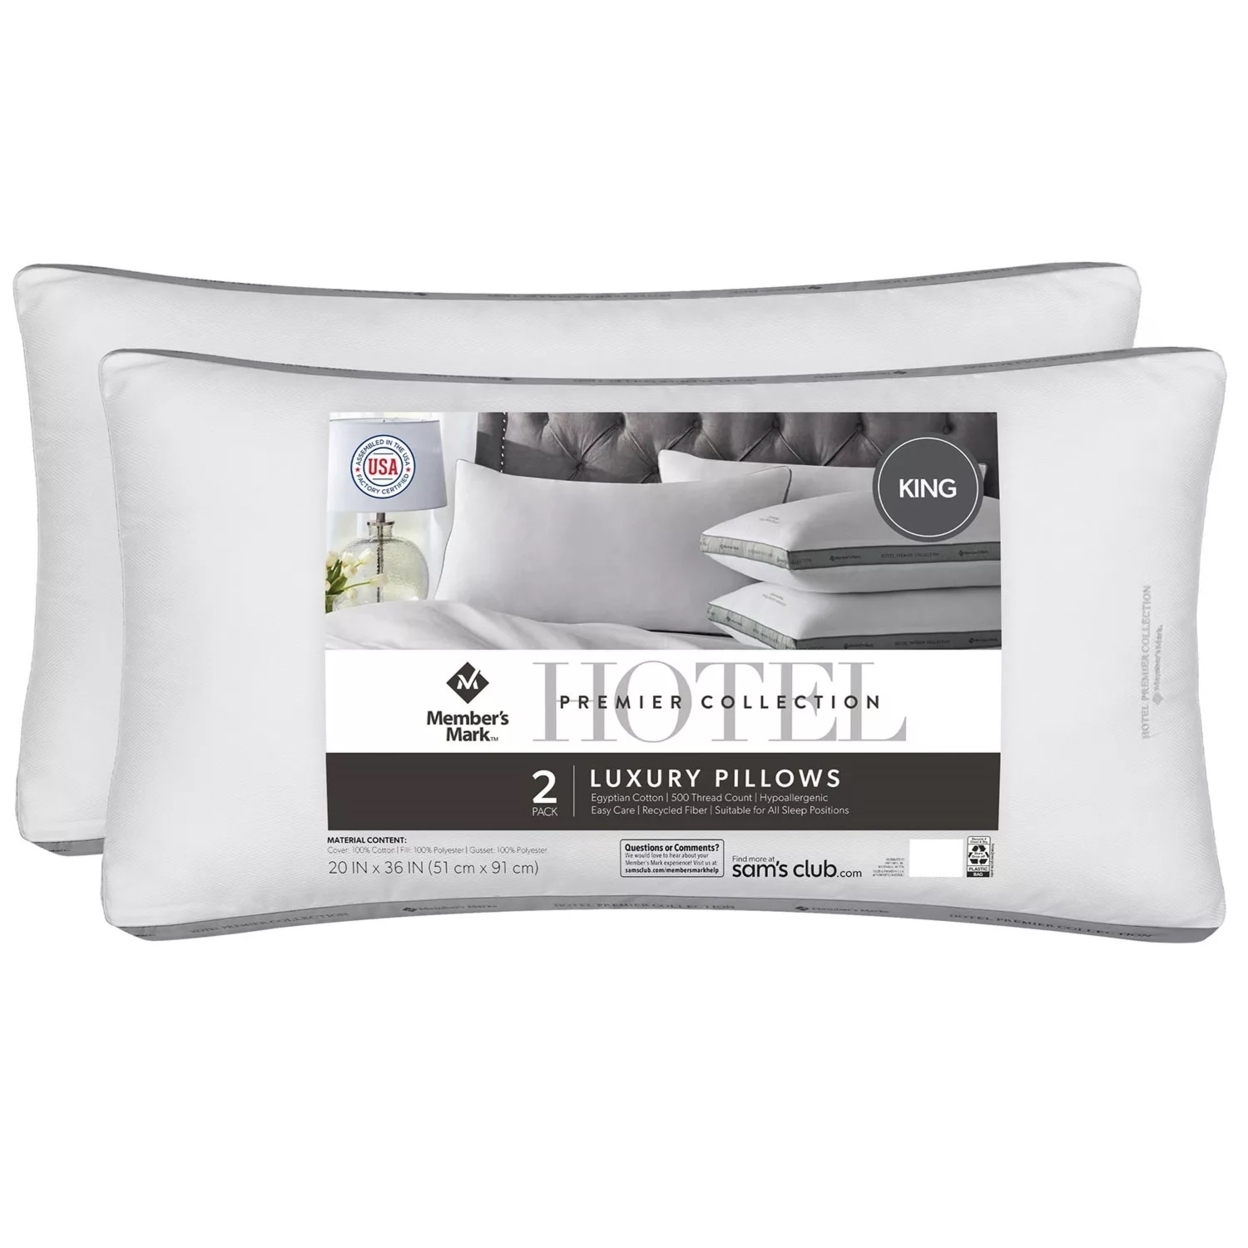 Member's Mark Hotel Premier Collection Bed Pillows, King (Pack Of 2)